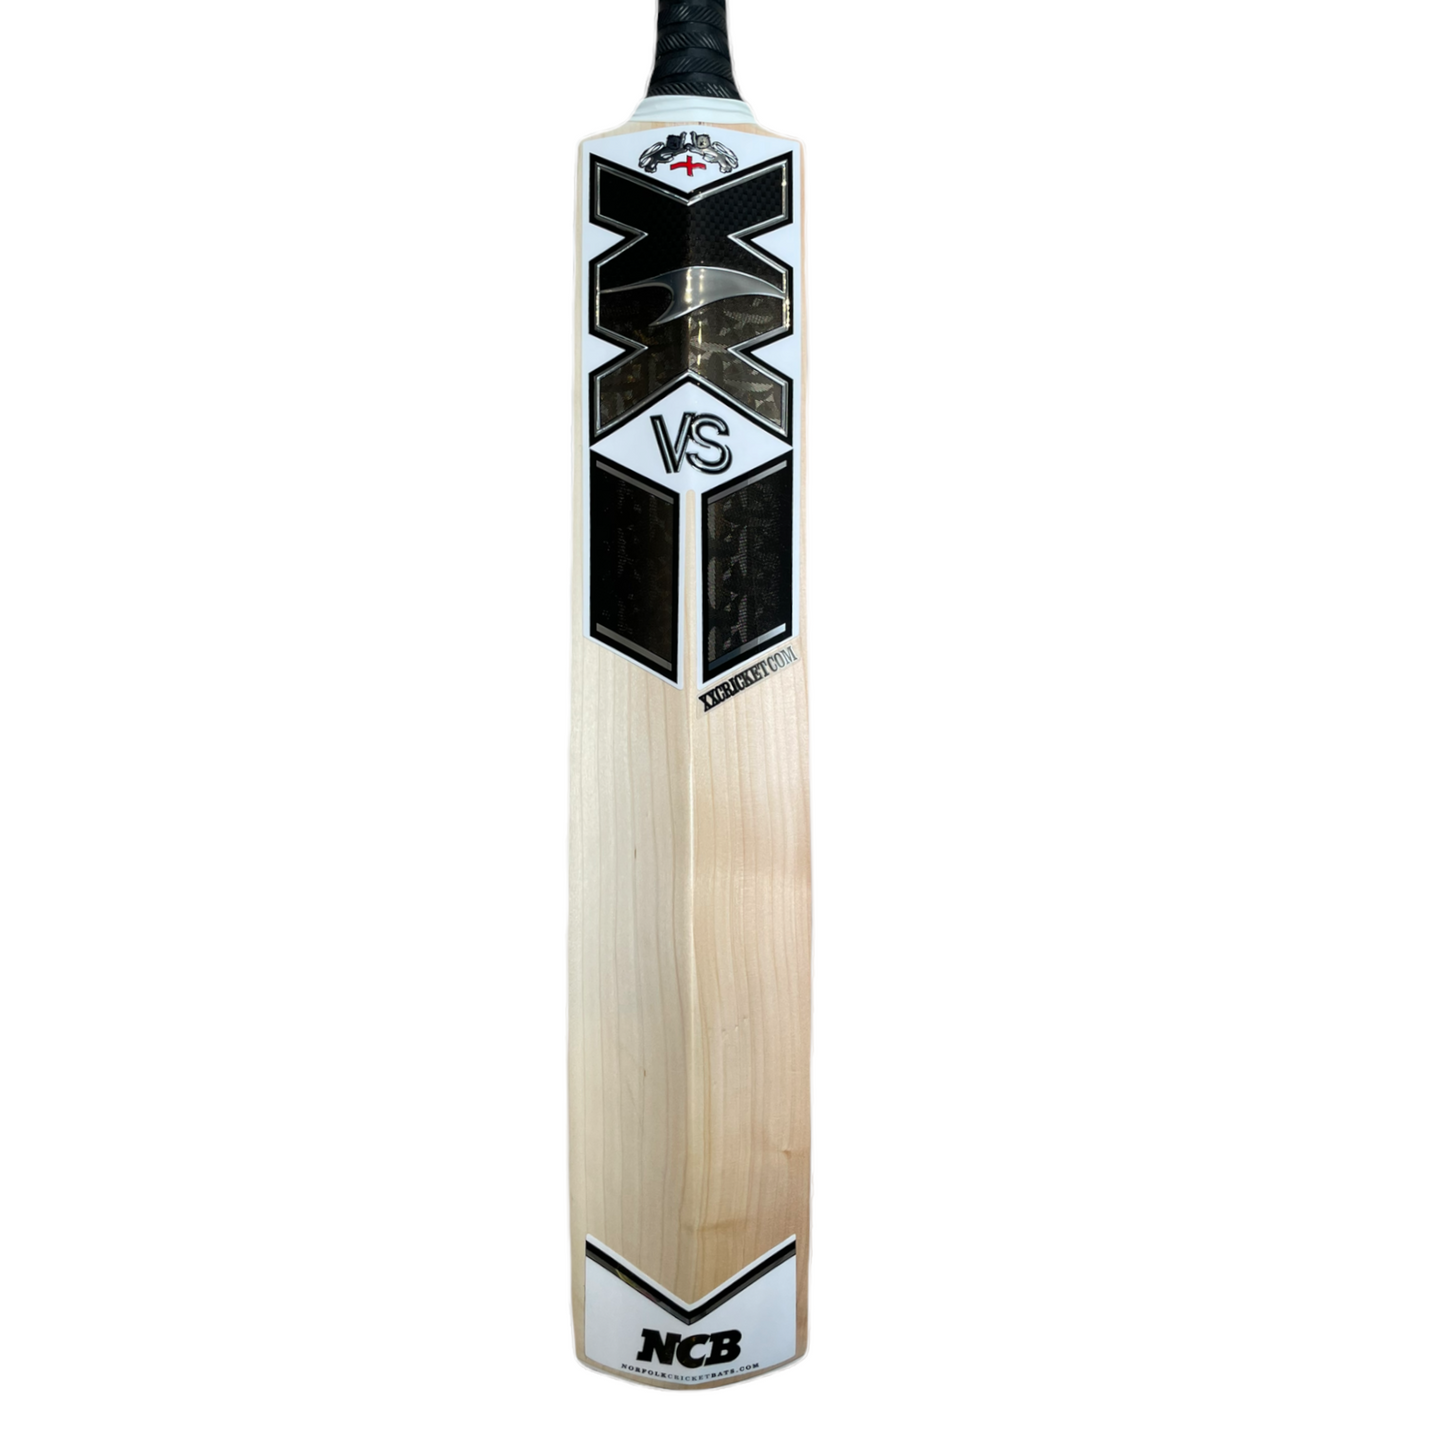 XX Cricket Norfolk Handmade cricket bat handcrafted Grade 1 Grade 2 NHS the best Hove East Sussex Same day pick up next day delivery